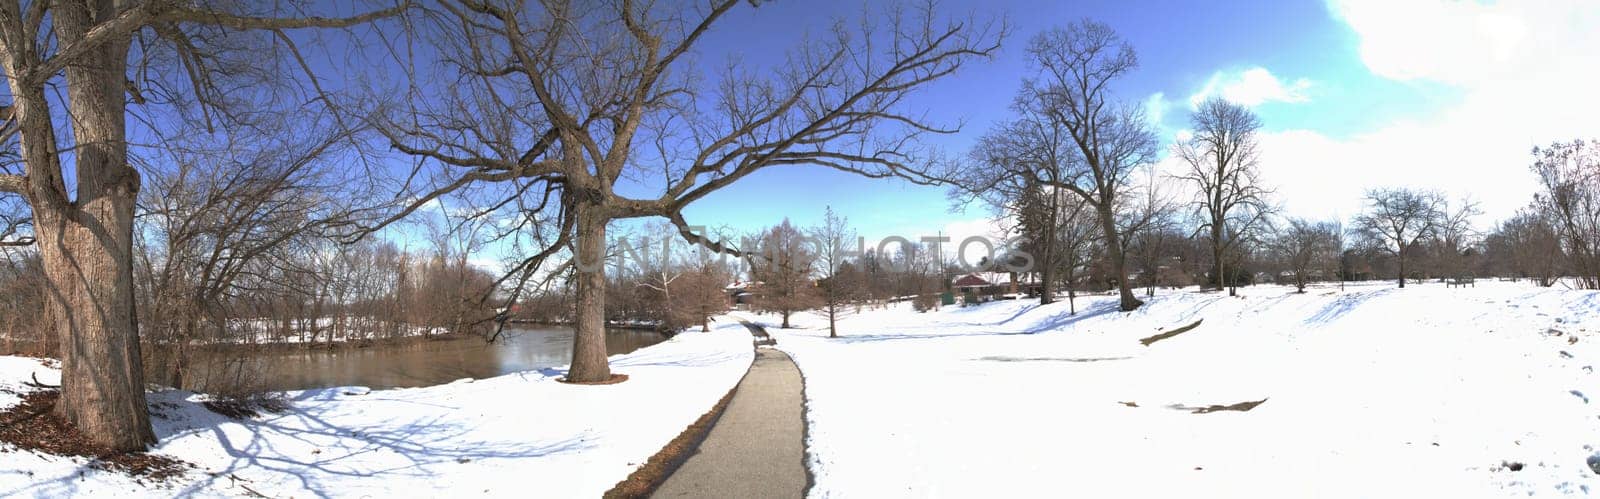 Panoramic Winter Solitude with Snowy Pathway, Leafless Trees, and Tranquil River by njproductions